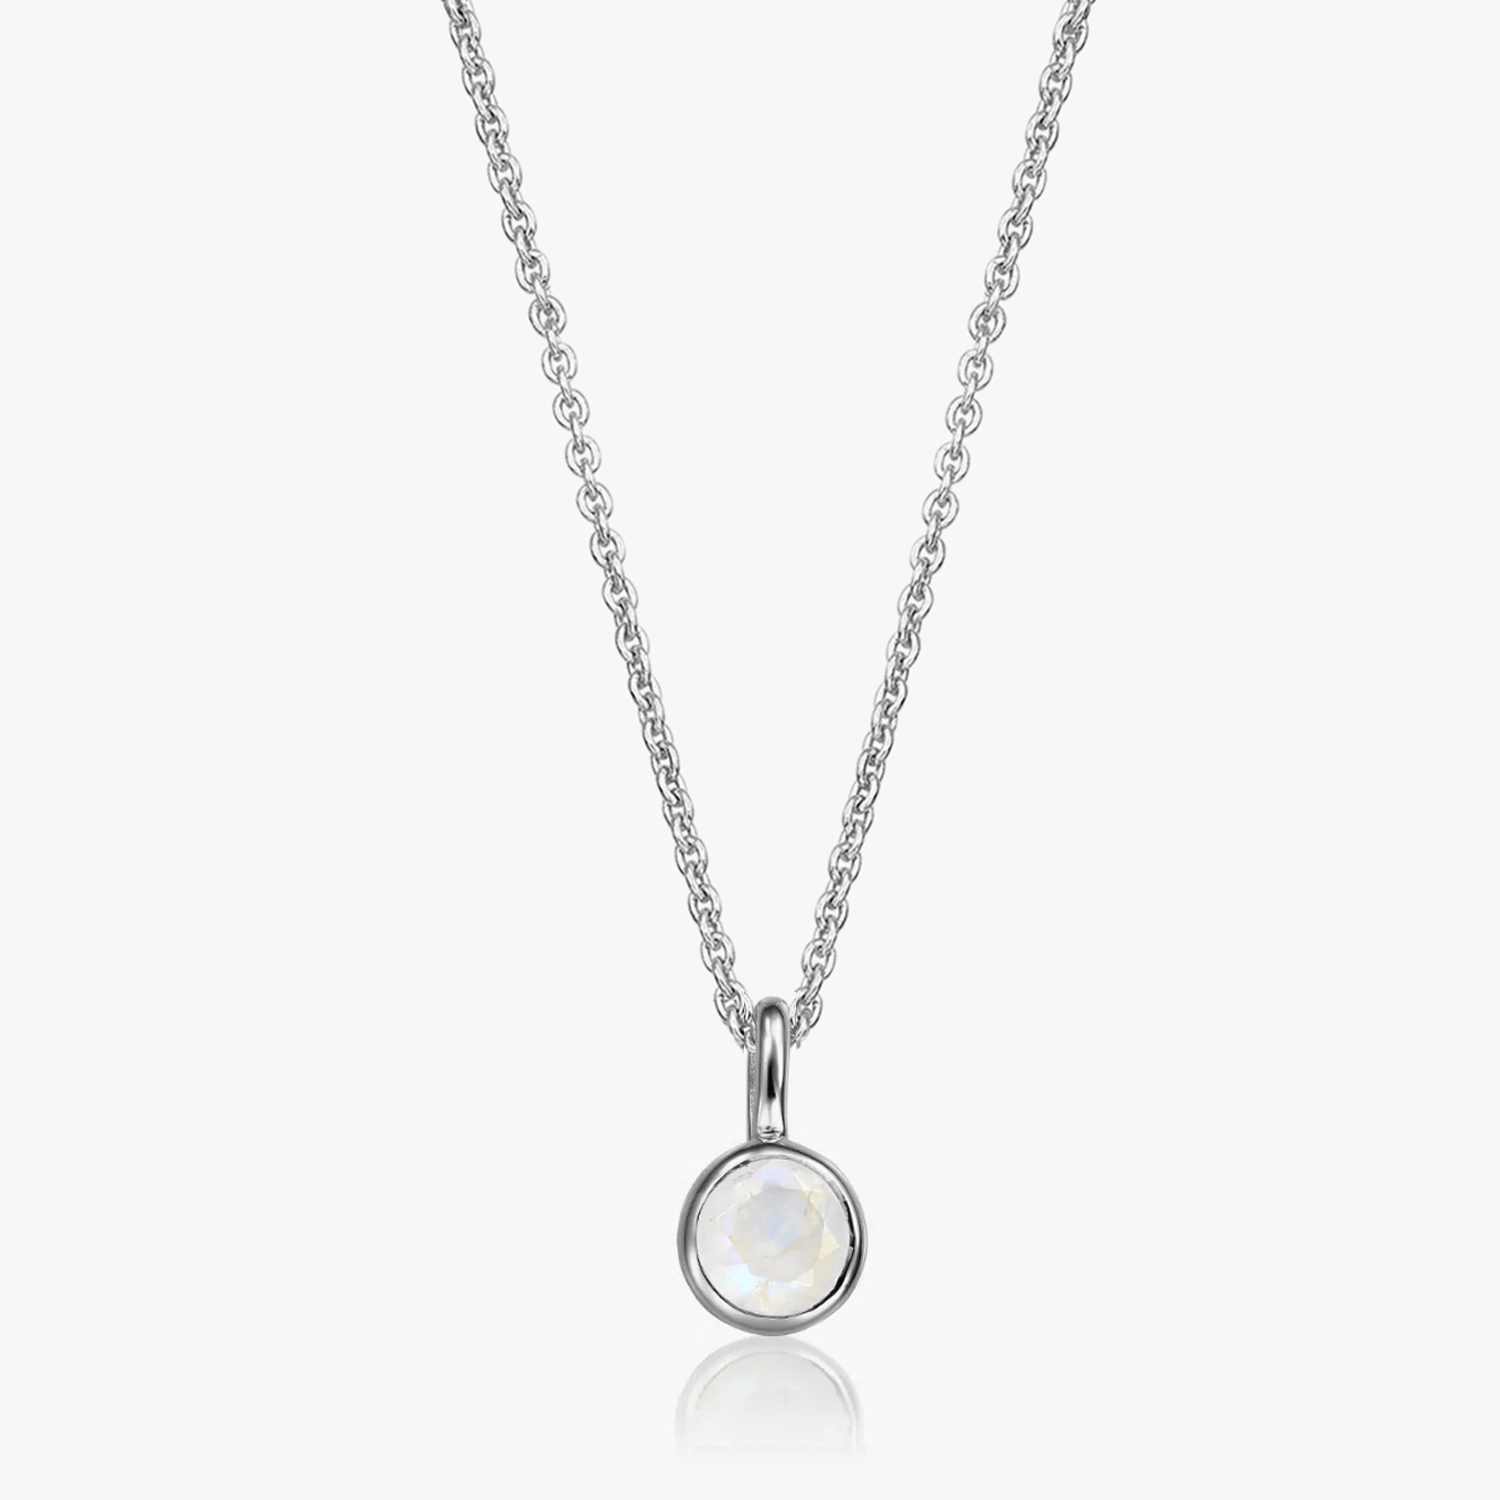 Silver necklace Birthstone June - Stone of the Moon